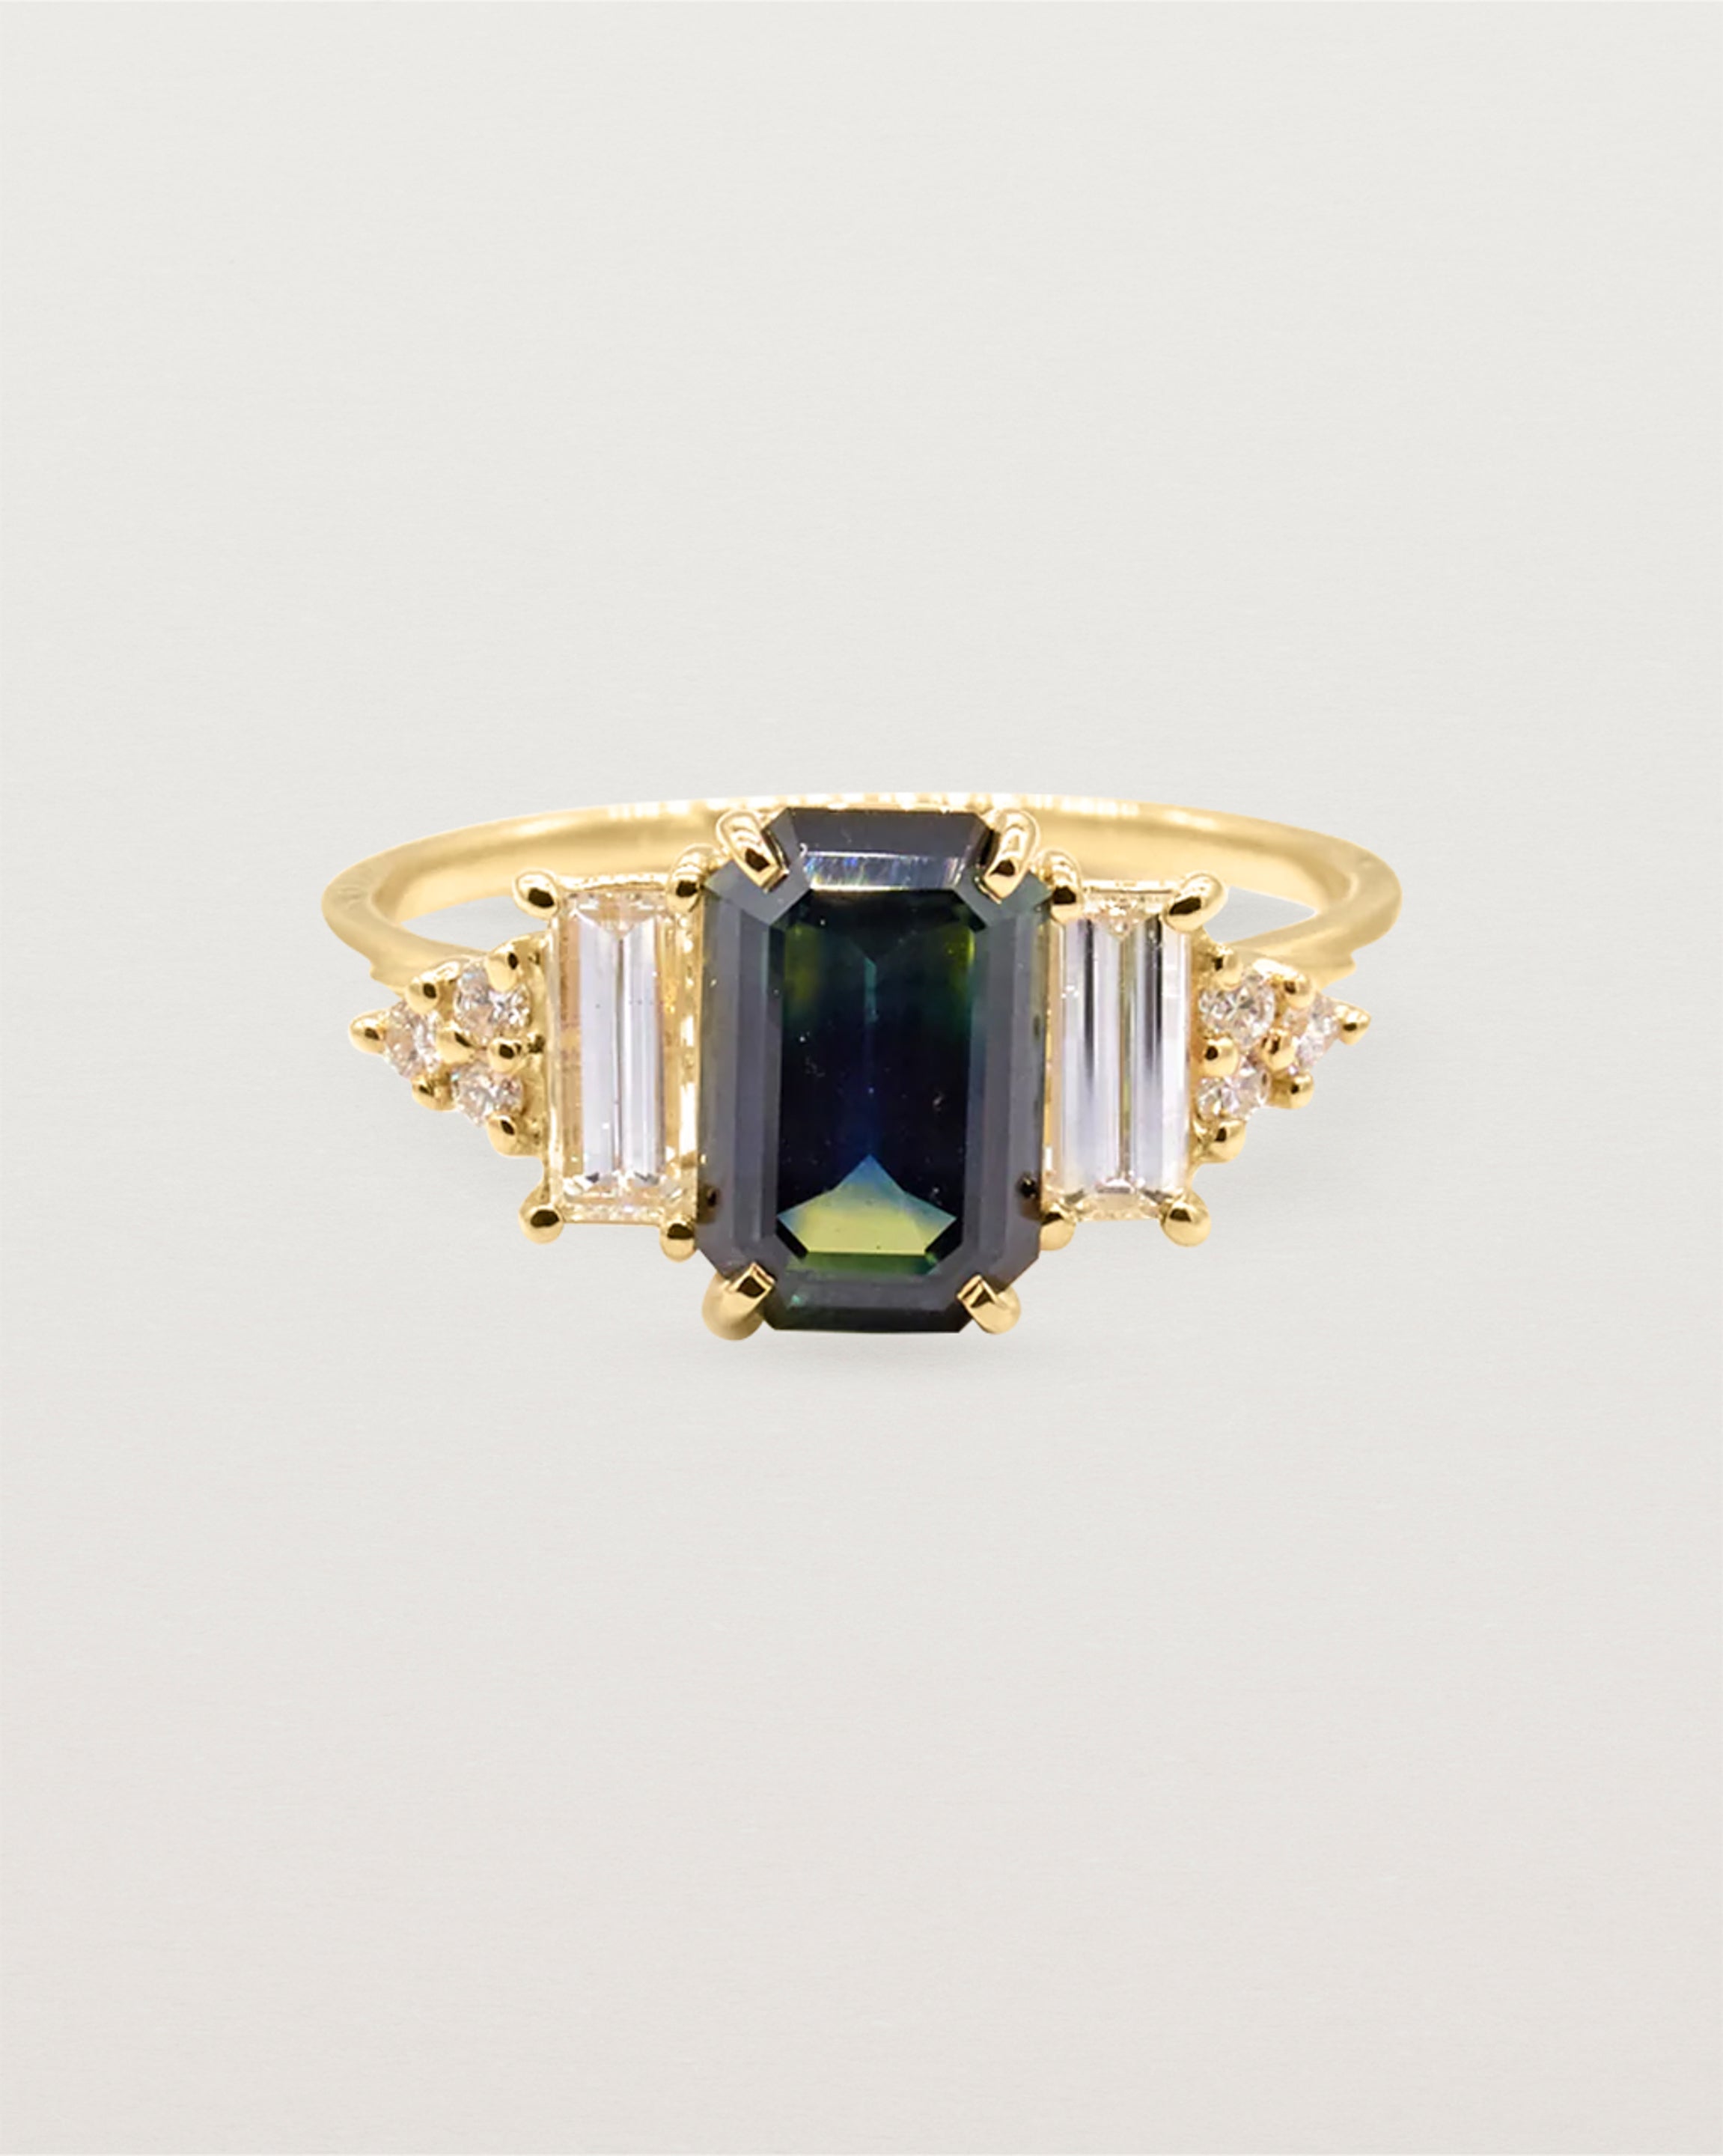 A 2.56ct Australian parti sapphire, set amongst a vintage inspired baguette and round cut diamond cluster crafted in yellow gold.